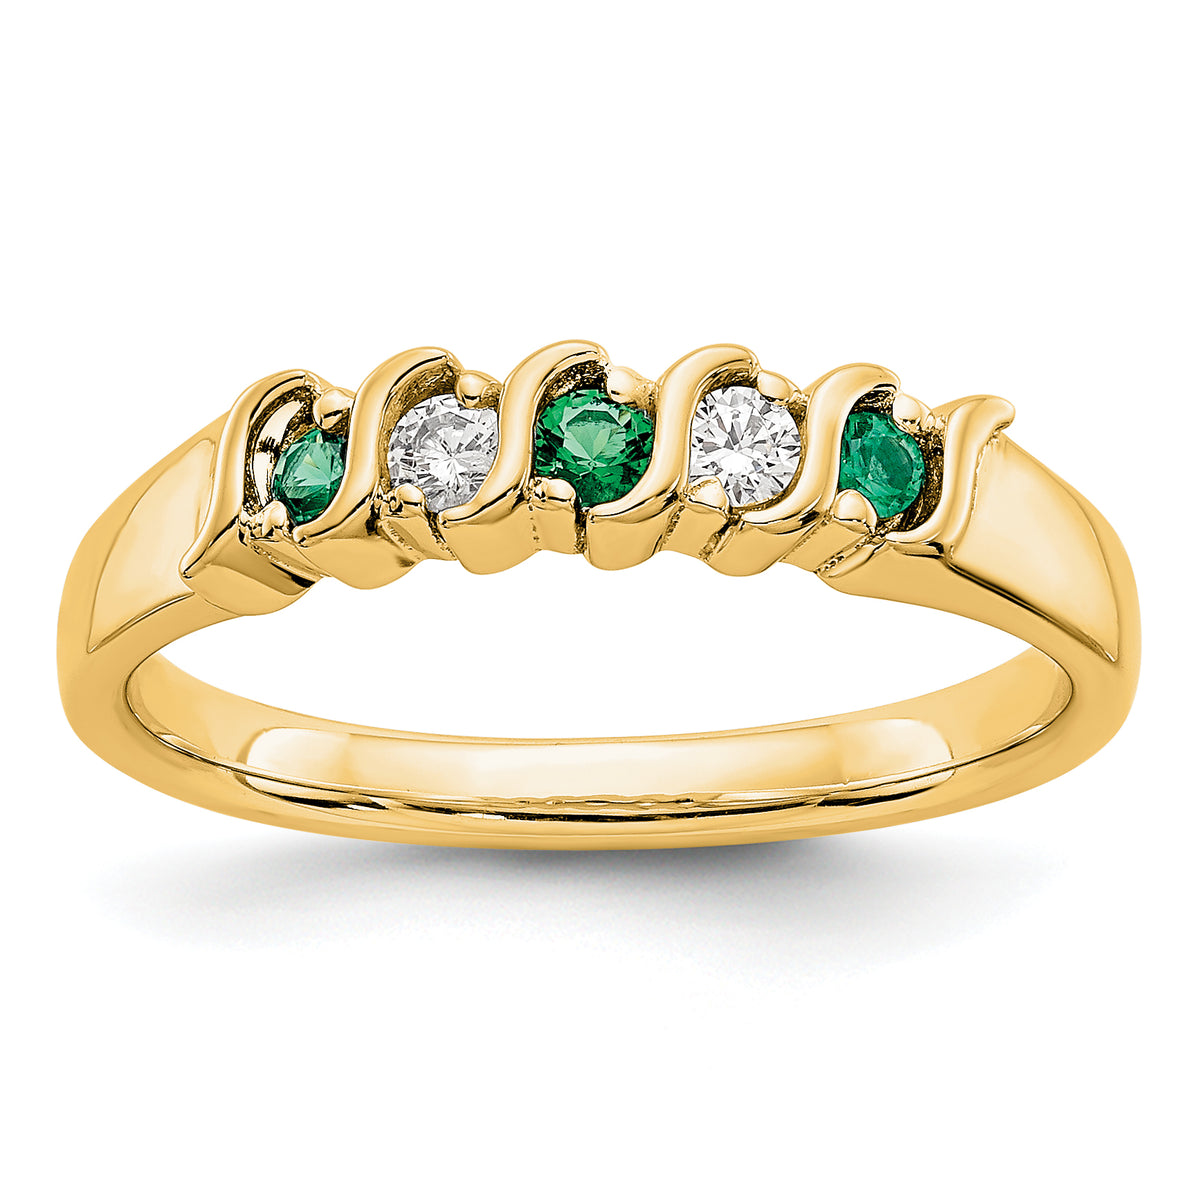 14K Yellow Gold 1/10 carat Diamond and Emerald Complete Band